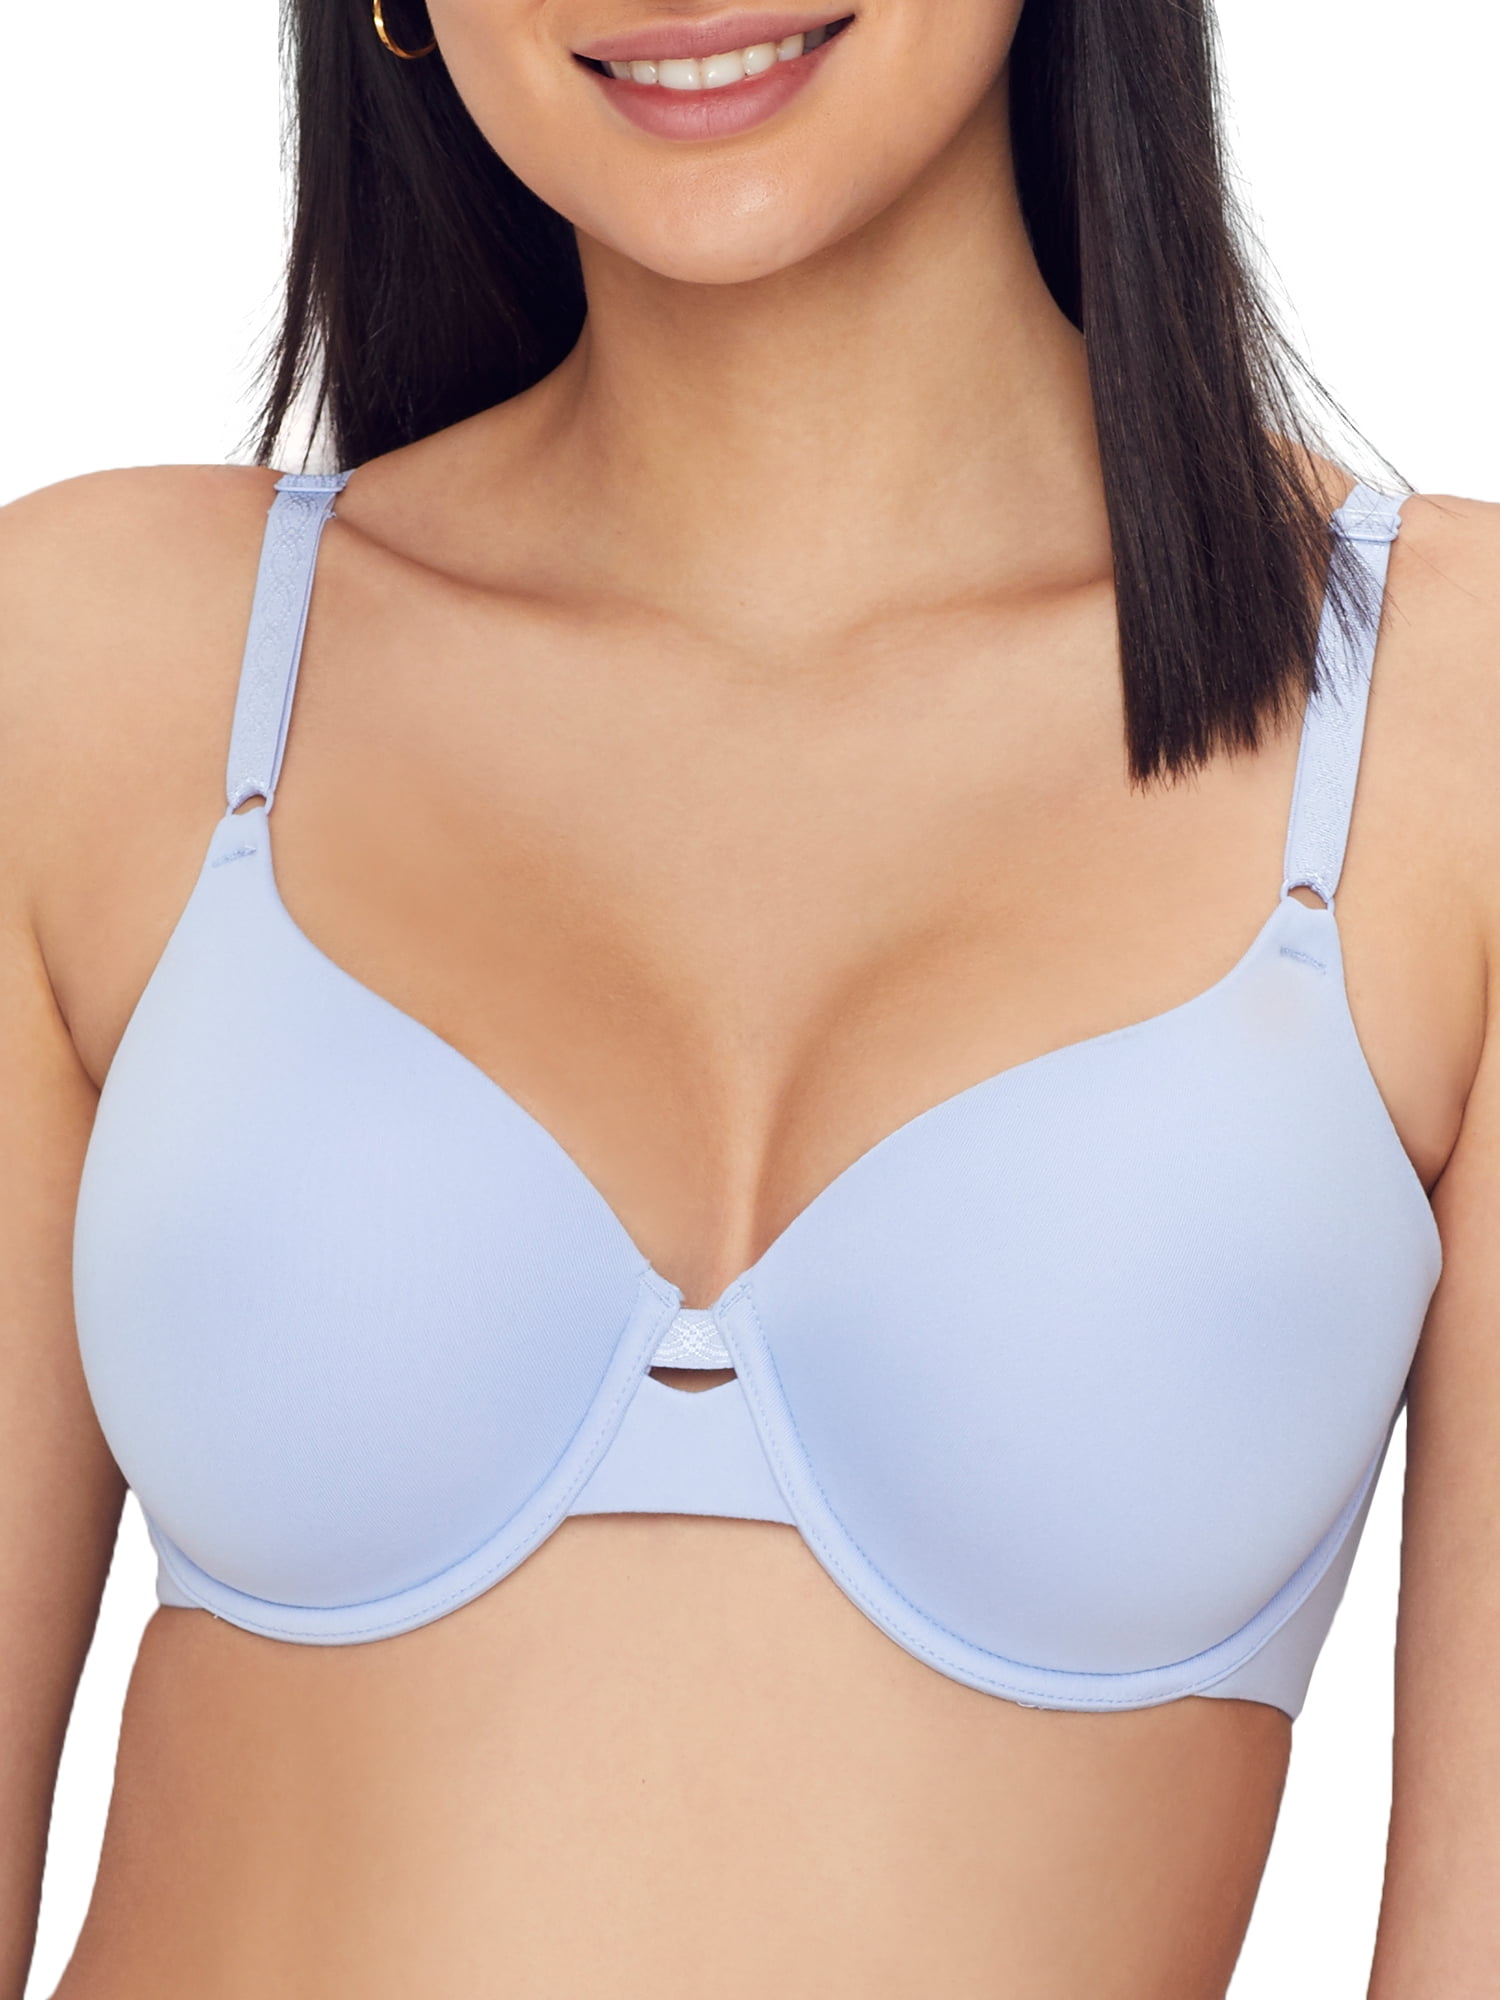 Women's Warner's RB1691A Cloud 9 Underwire Contour Bra (Toasted Almond 38D)  